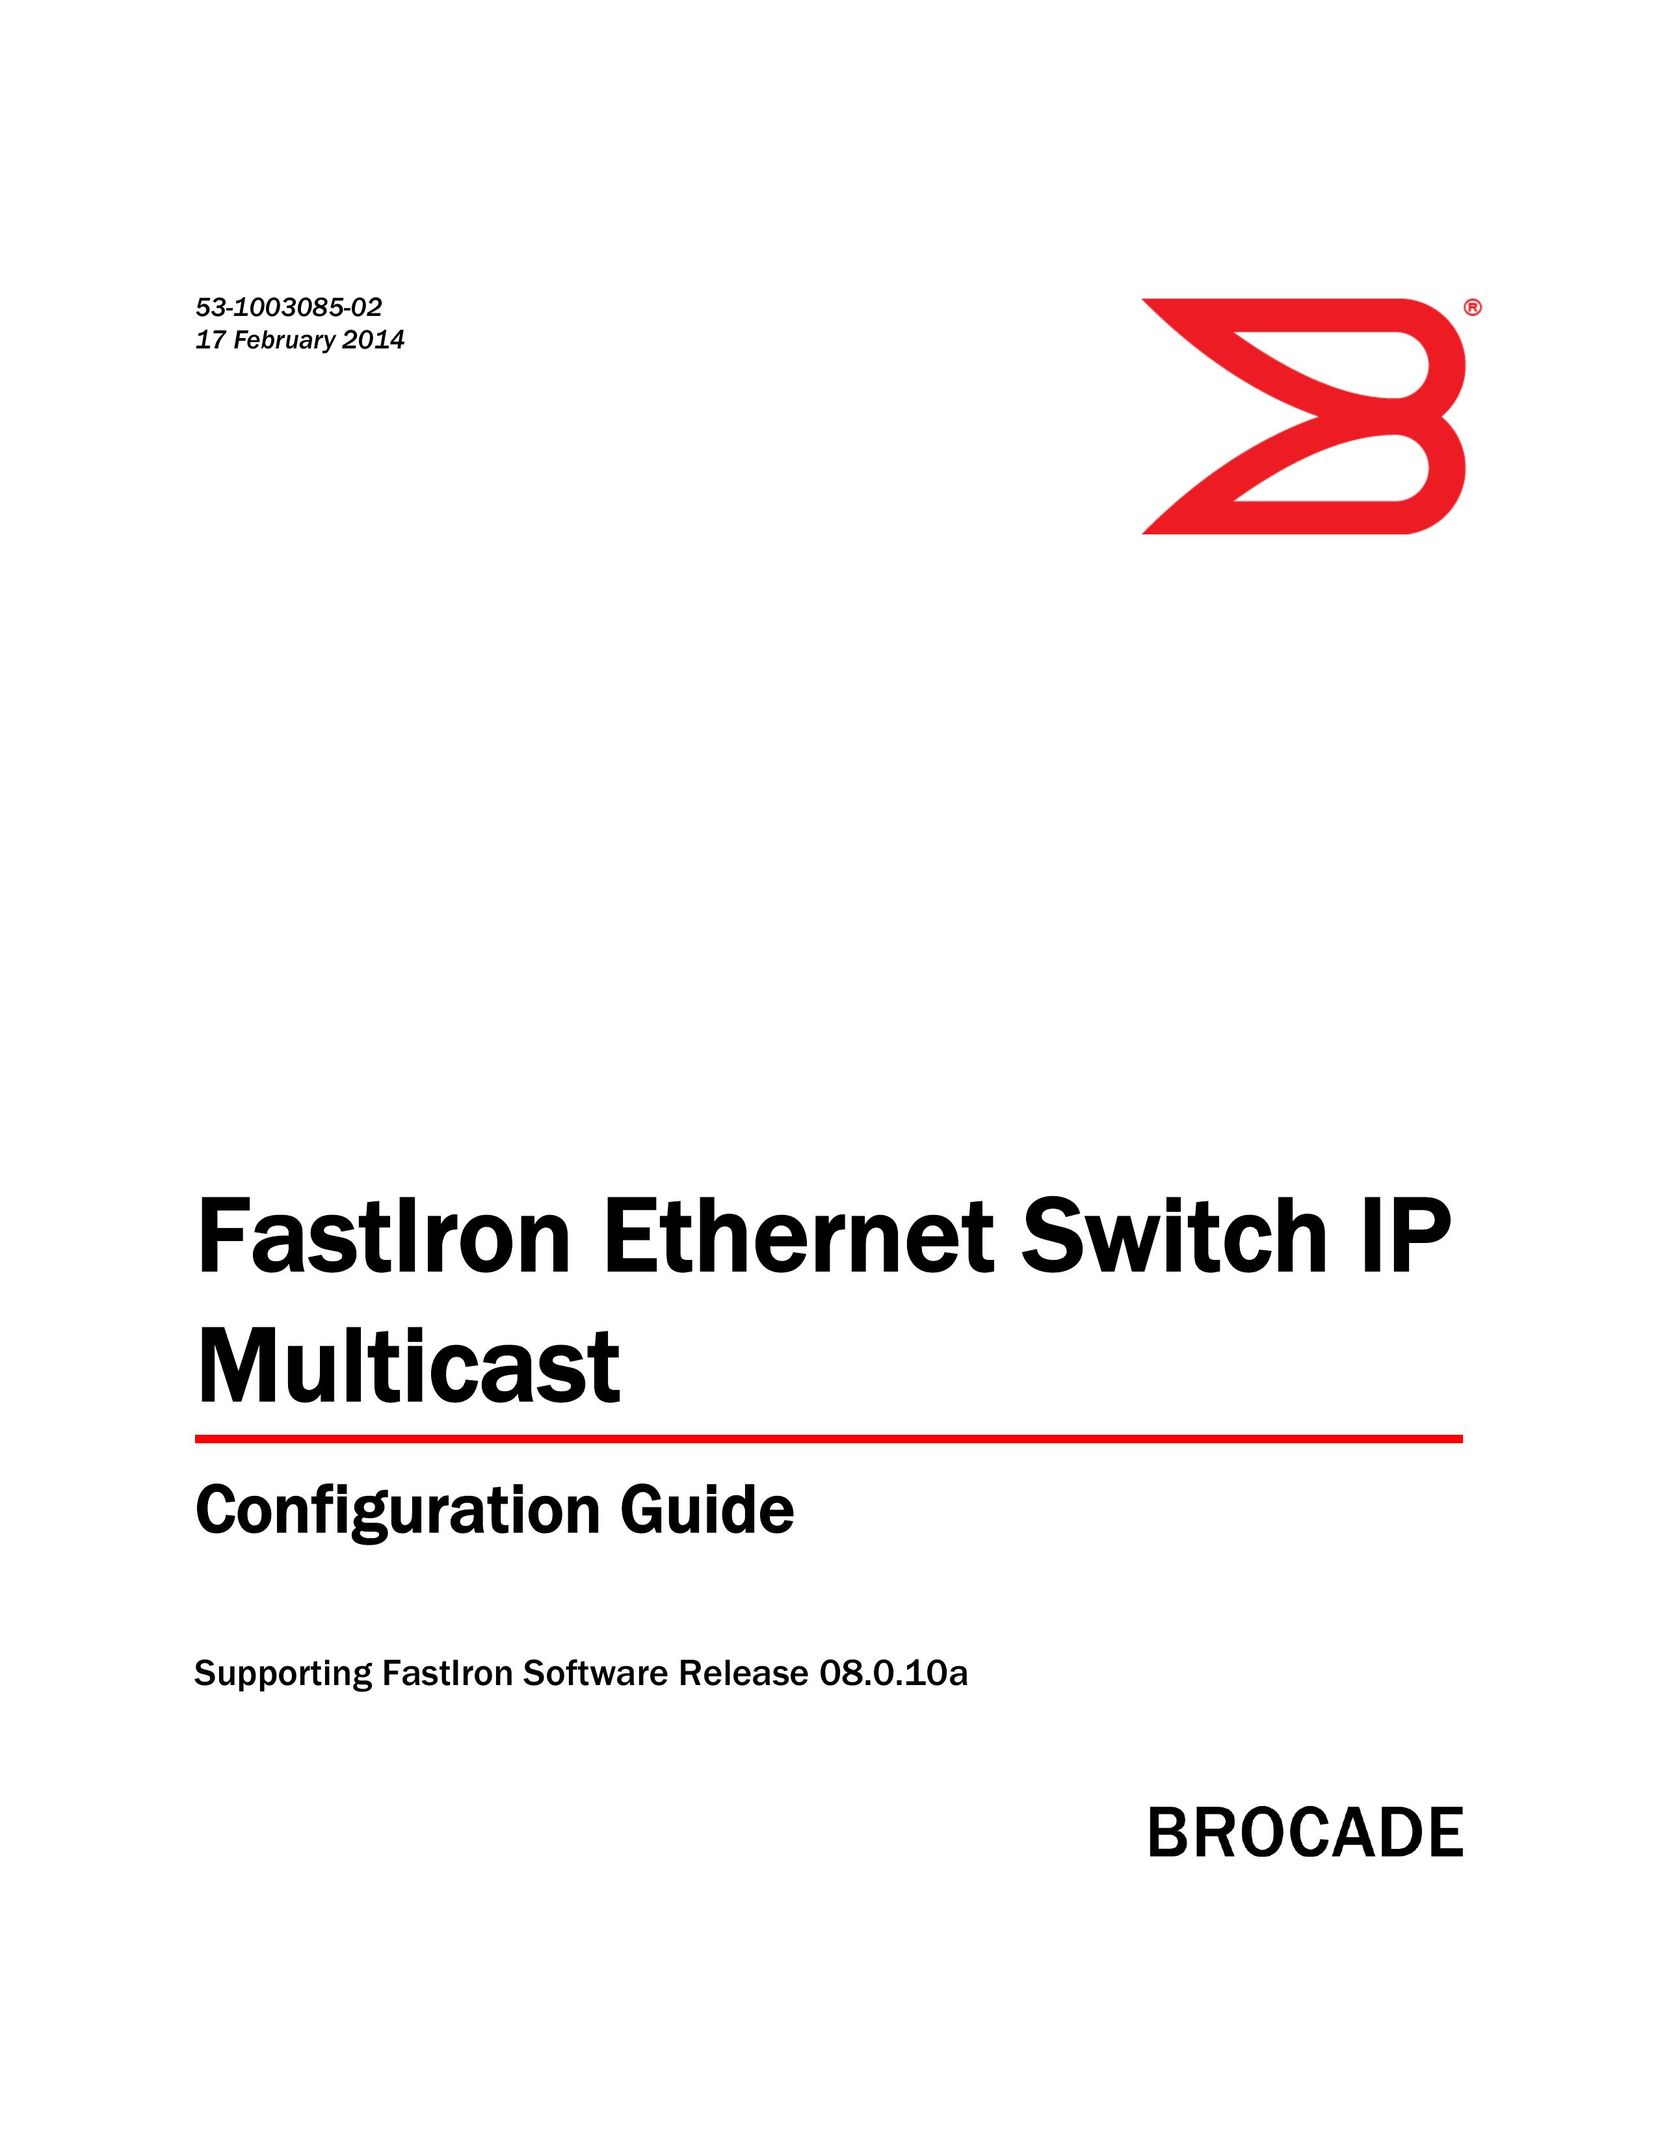 Brocade Communications Systems IPMC5000PEF Switch User Manual